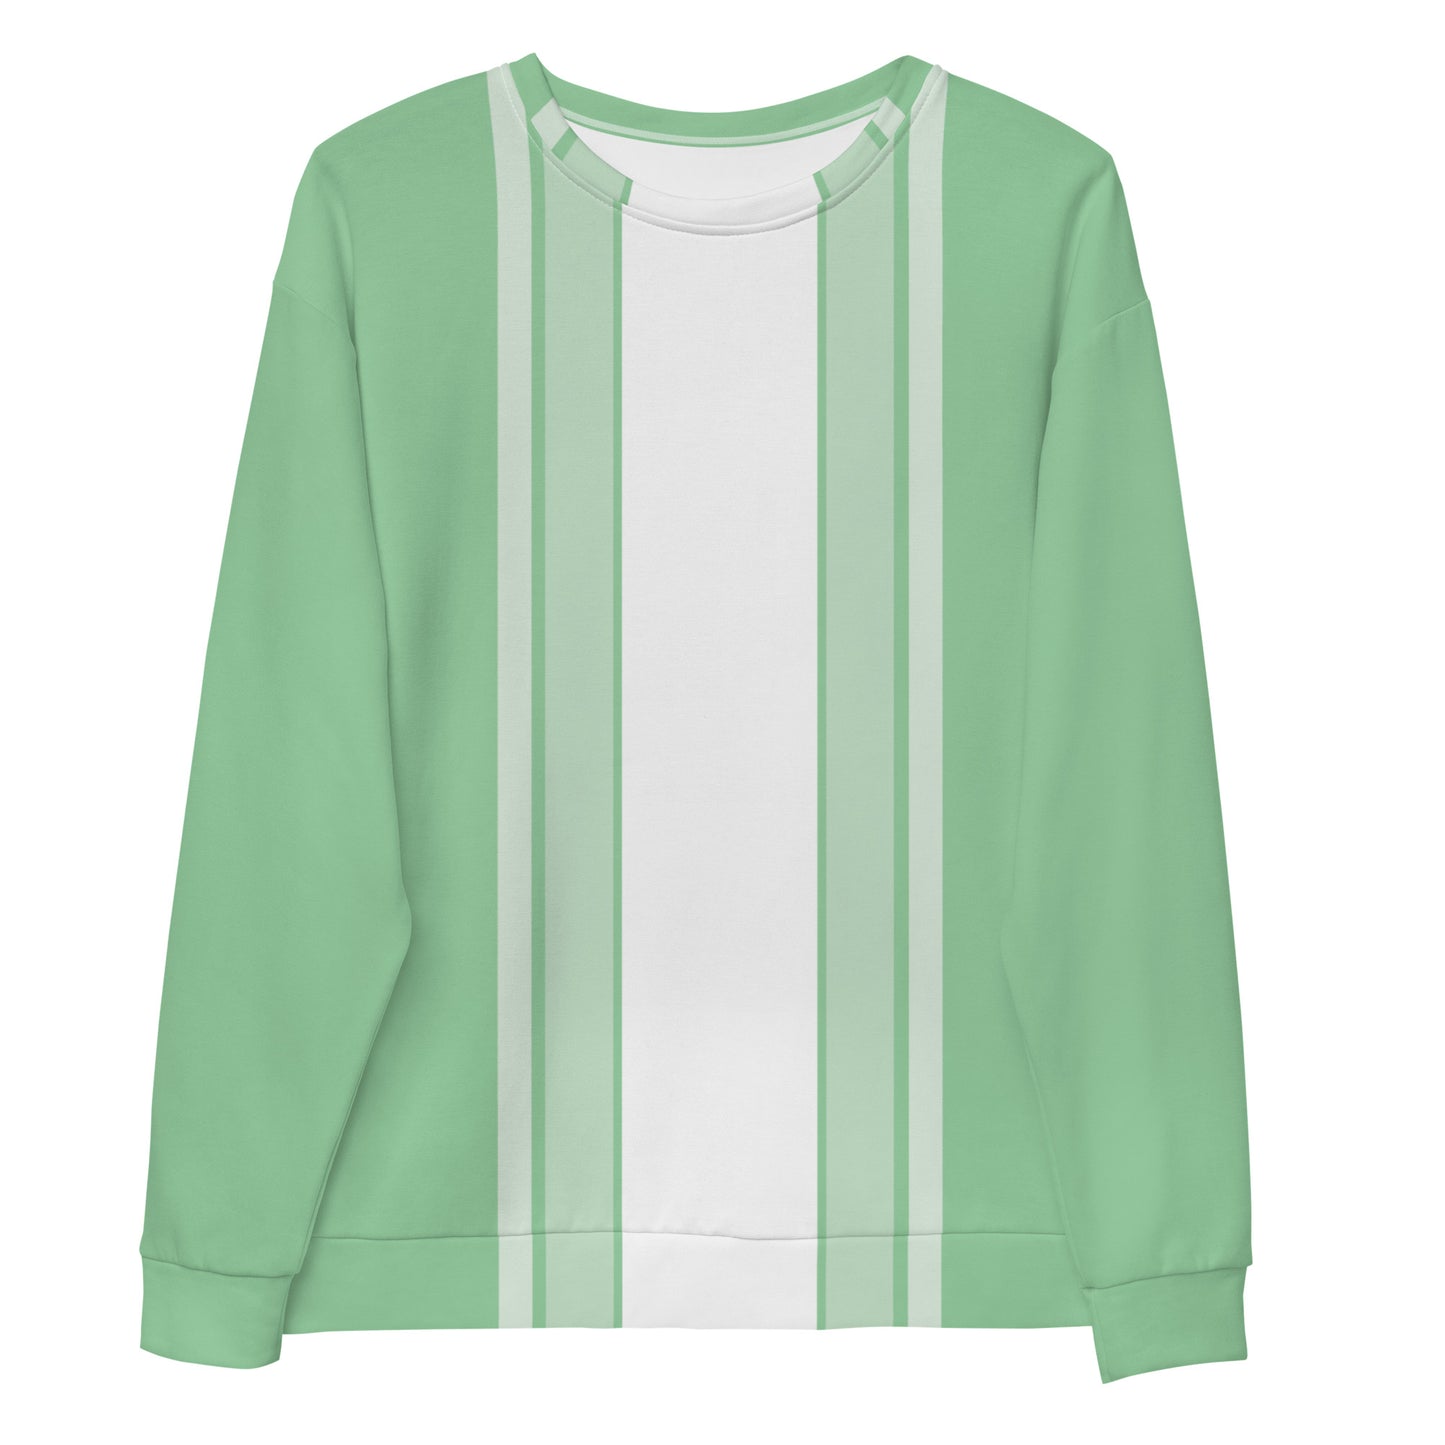 Vertical Lines Mint - Sustainably Made Sweatshirt